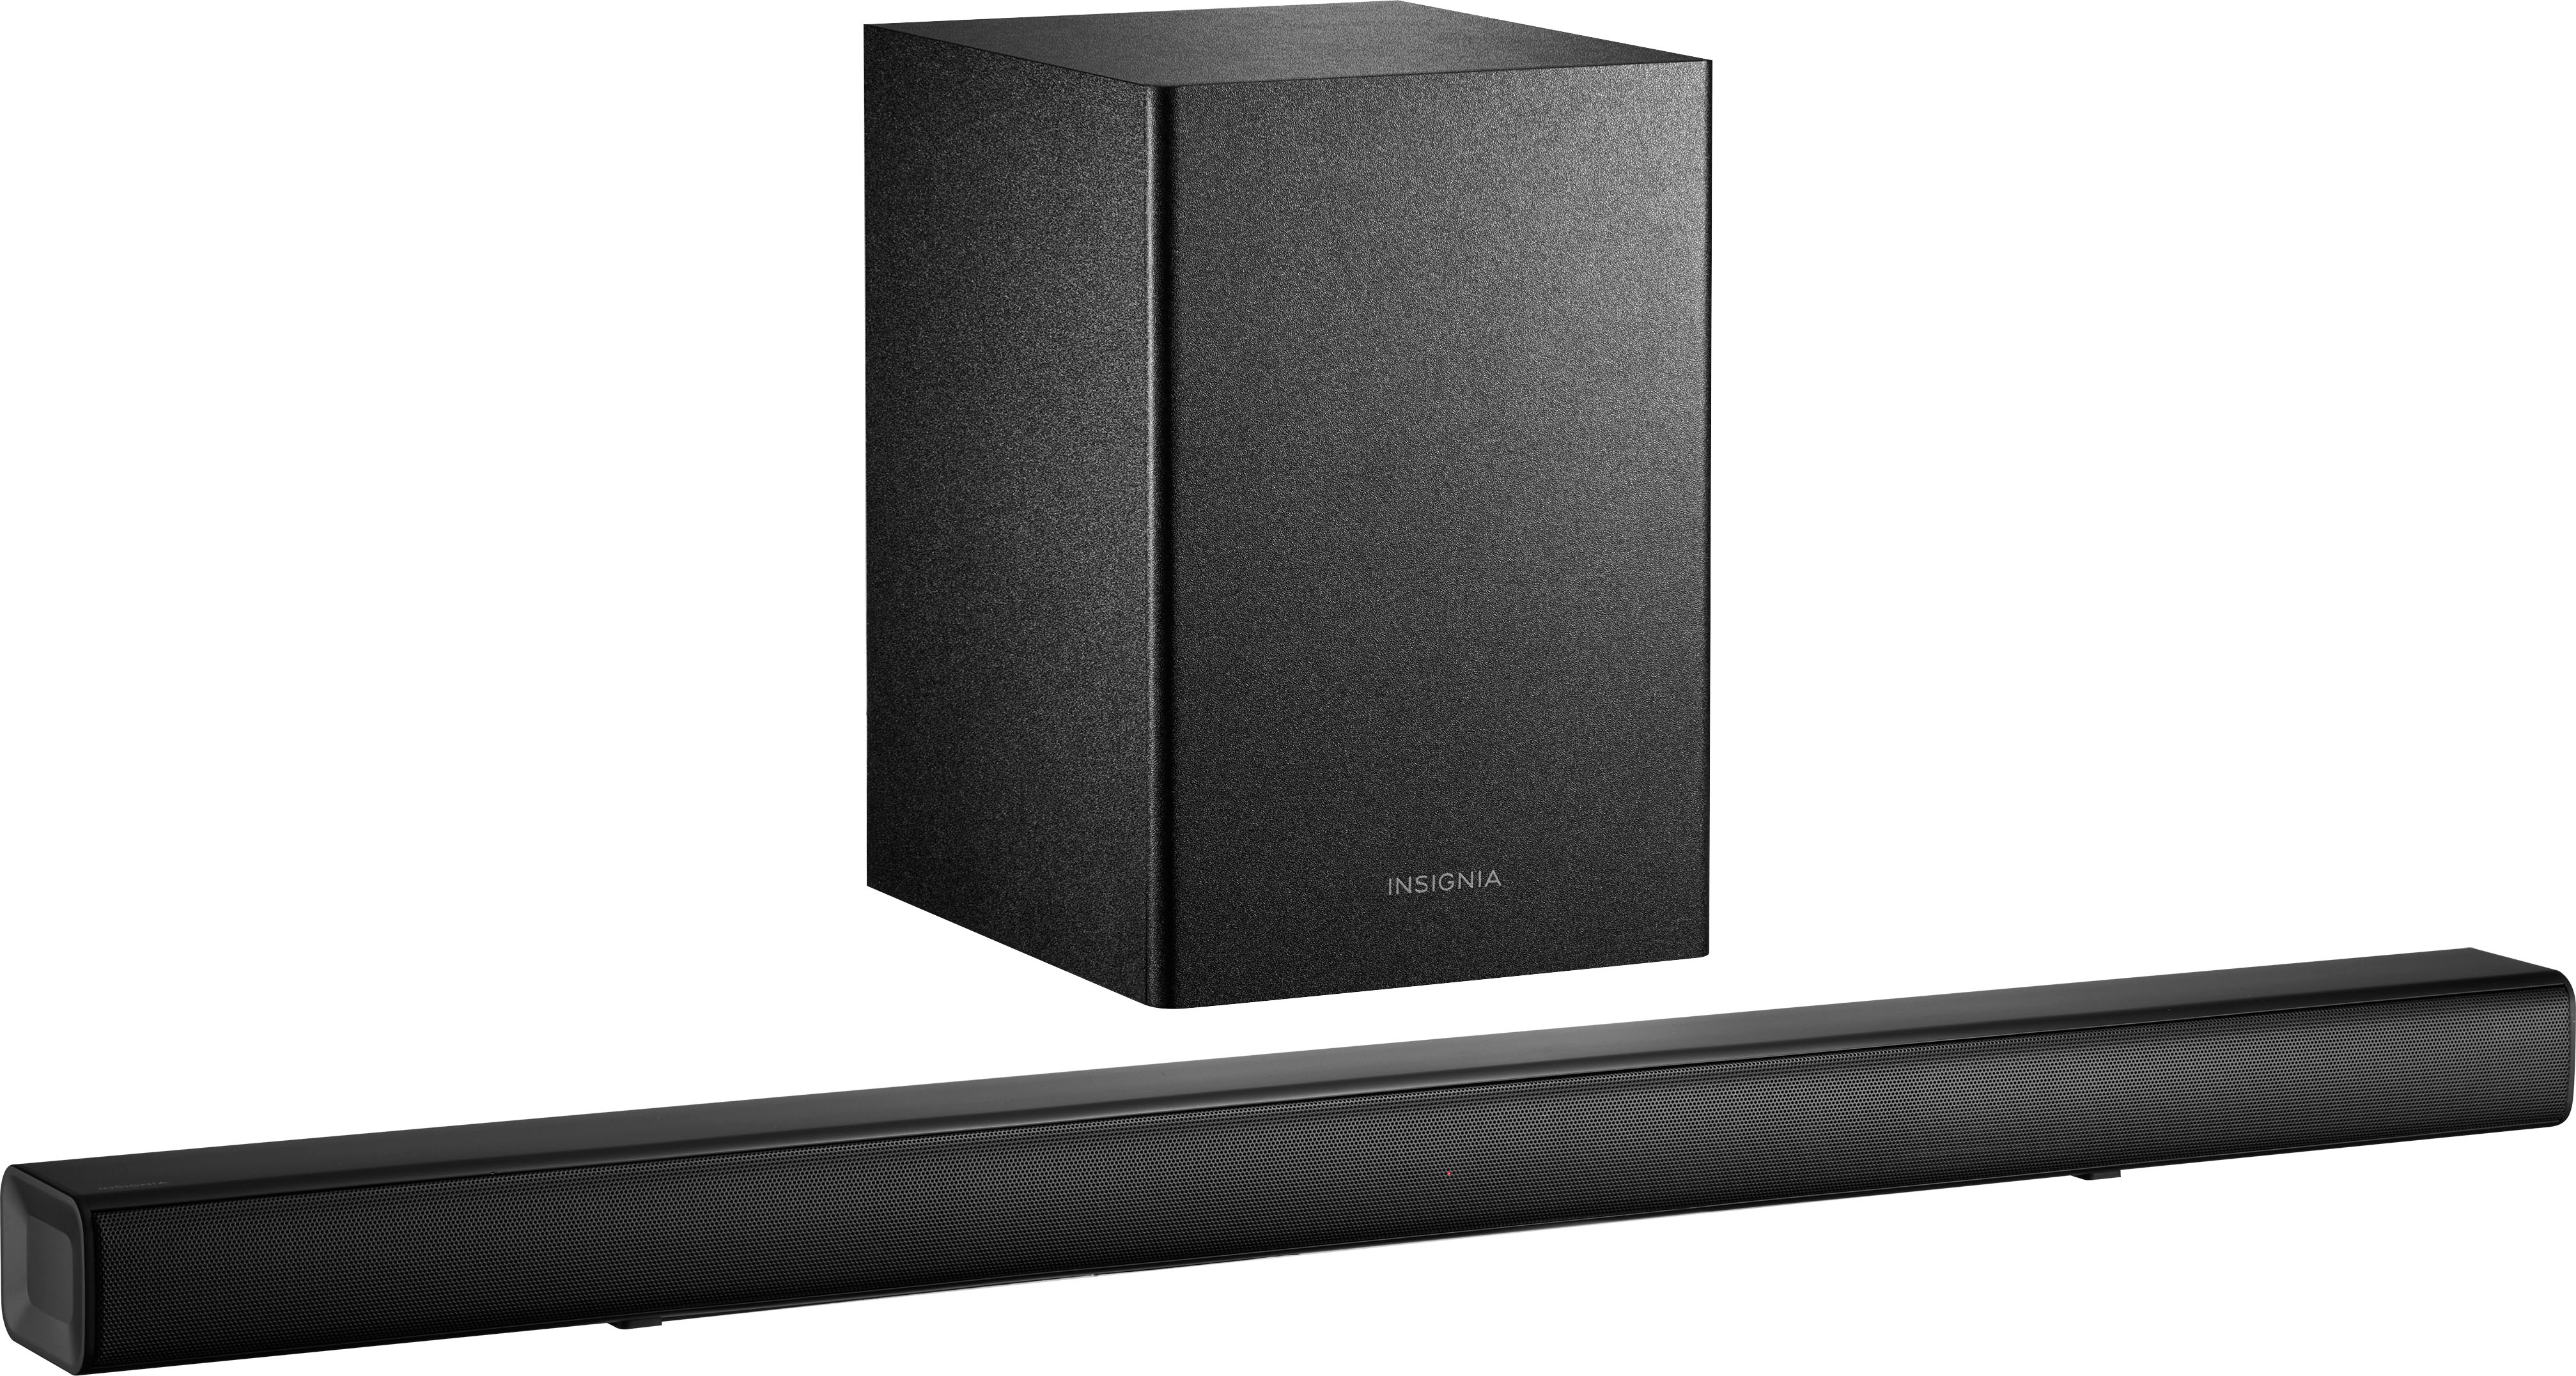 Angle View: Insignia™ - 2.1-Channel Soundbar with Wireless Subwoofer - Black